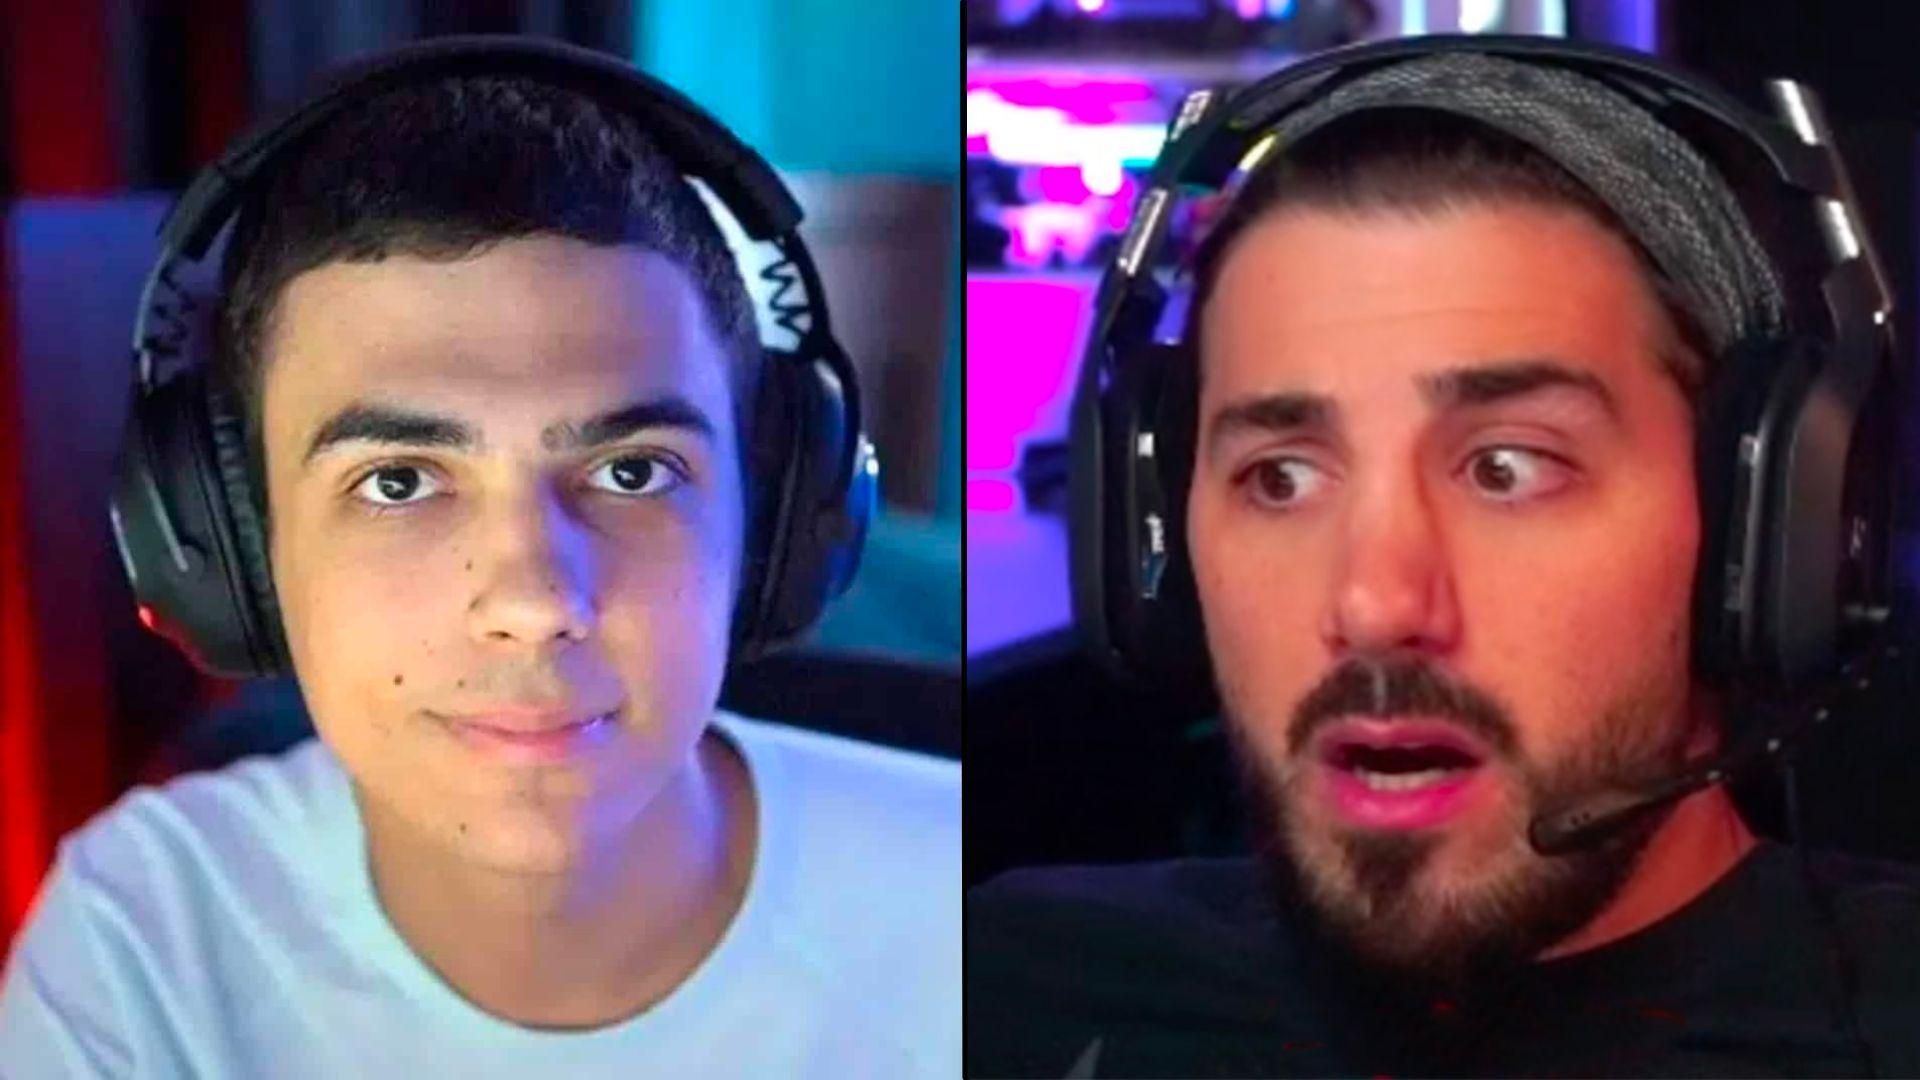 Nickmercs and imperialhal side by side